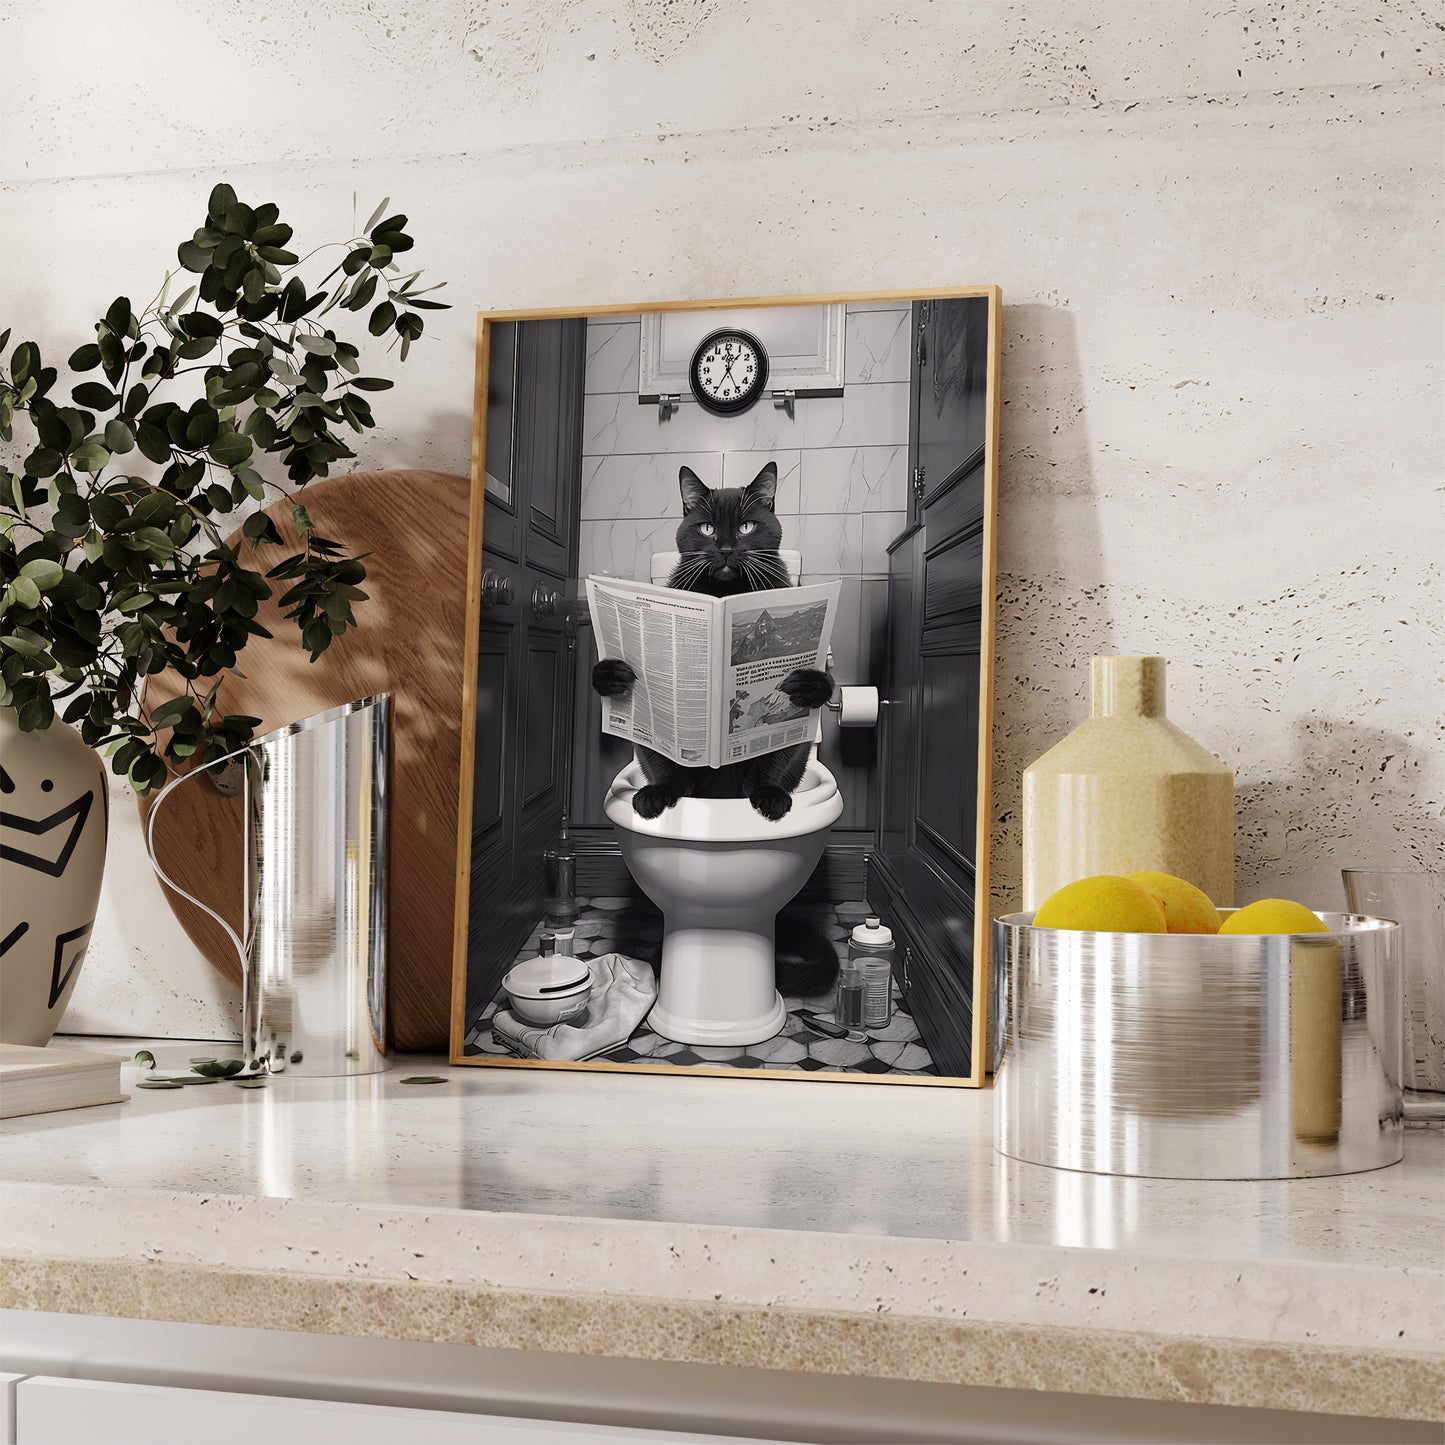 A whimsical framed picture of a cat reading a newspaper on a toilet.